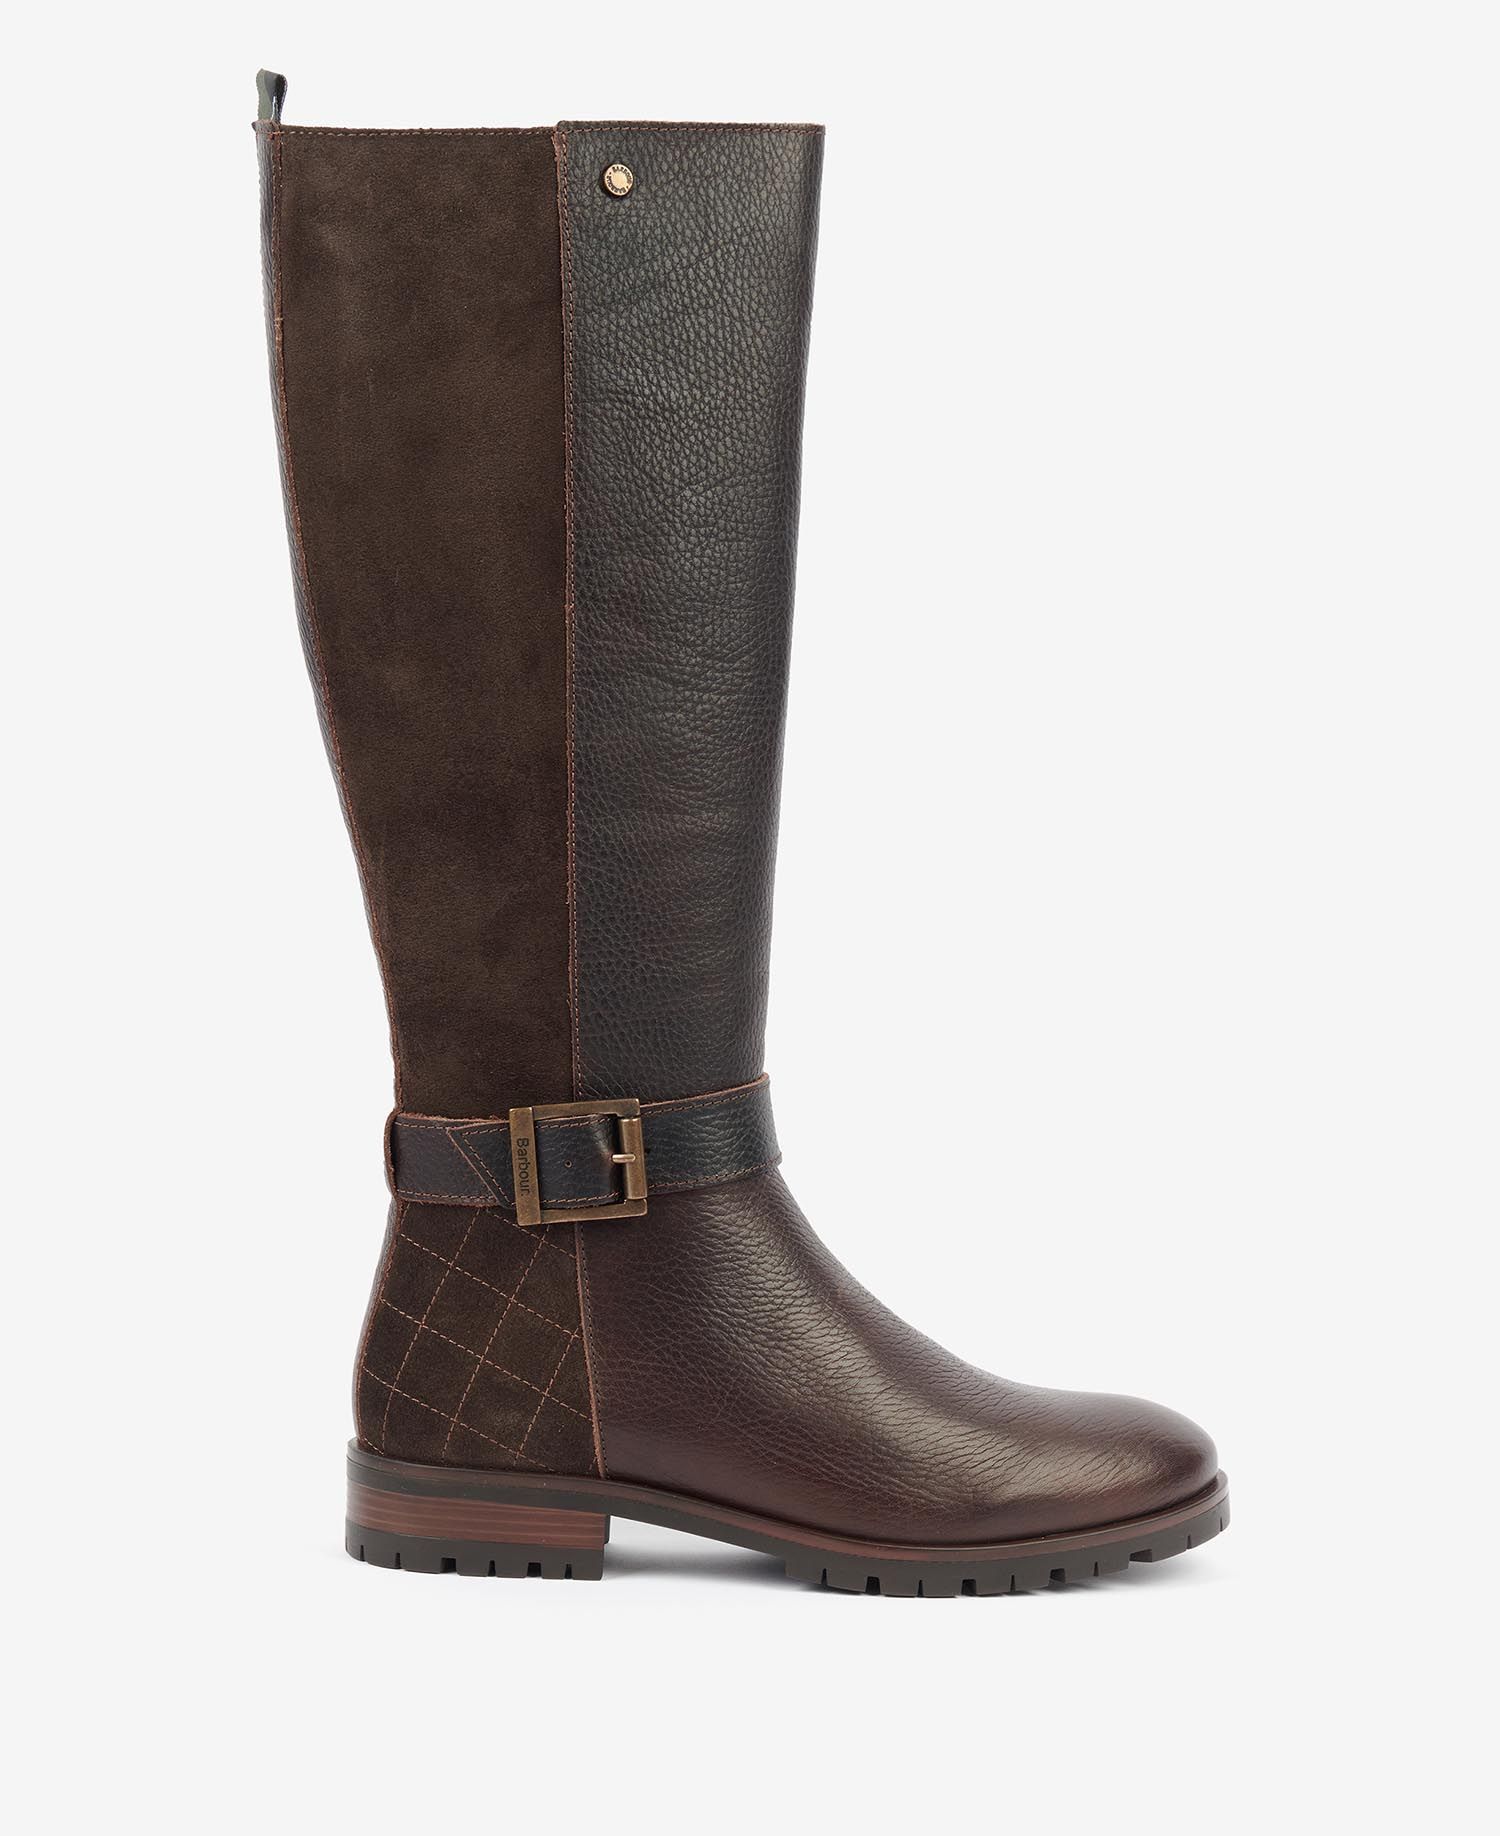 Barbour Alisha Boots Brown - Ladds